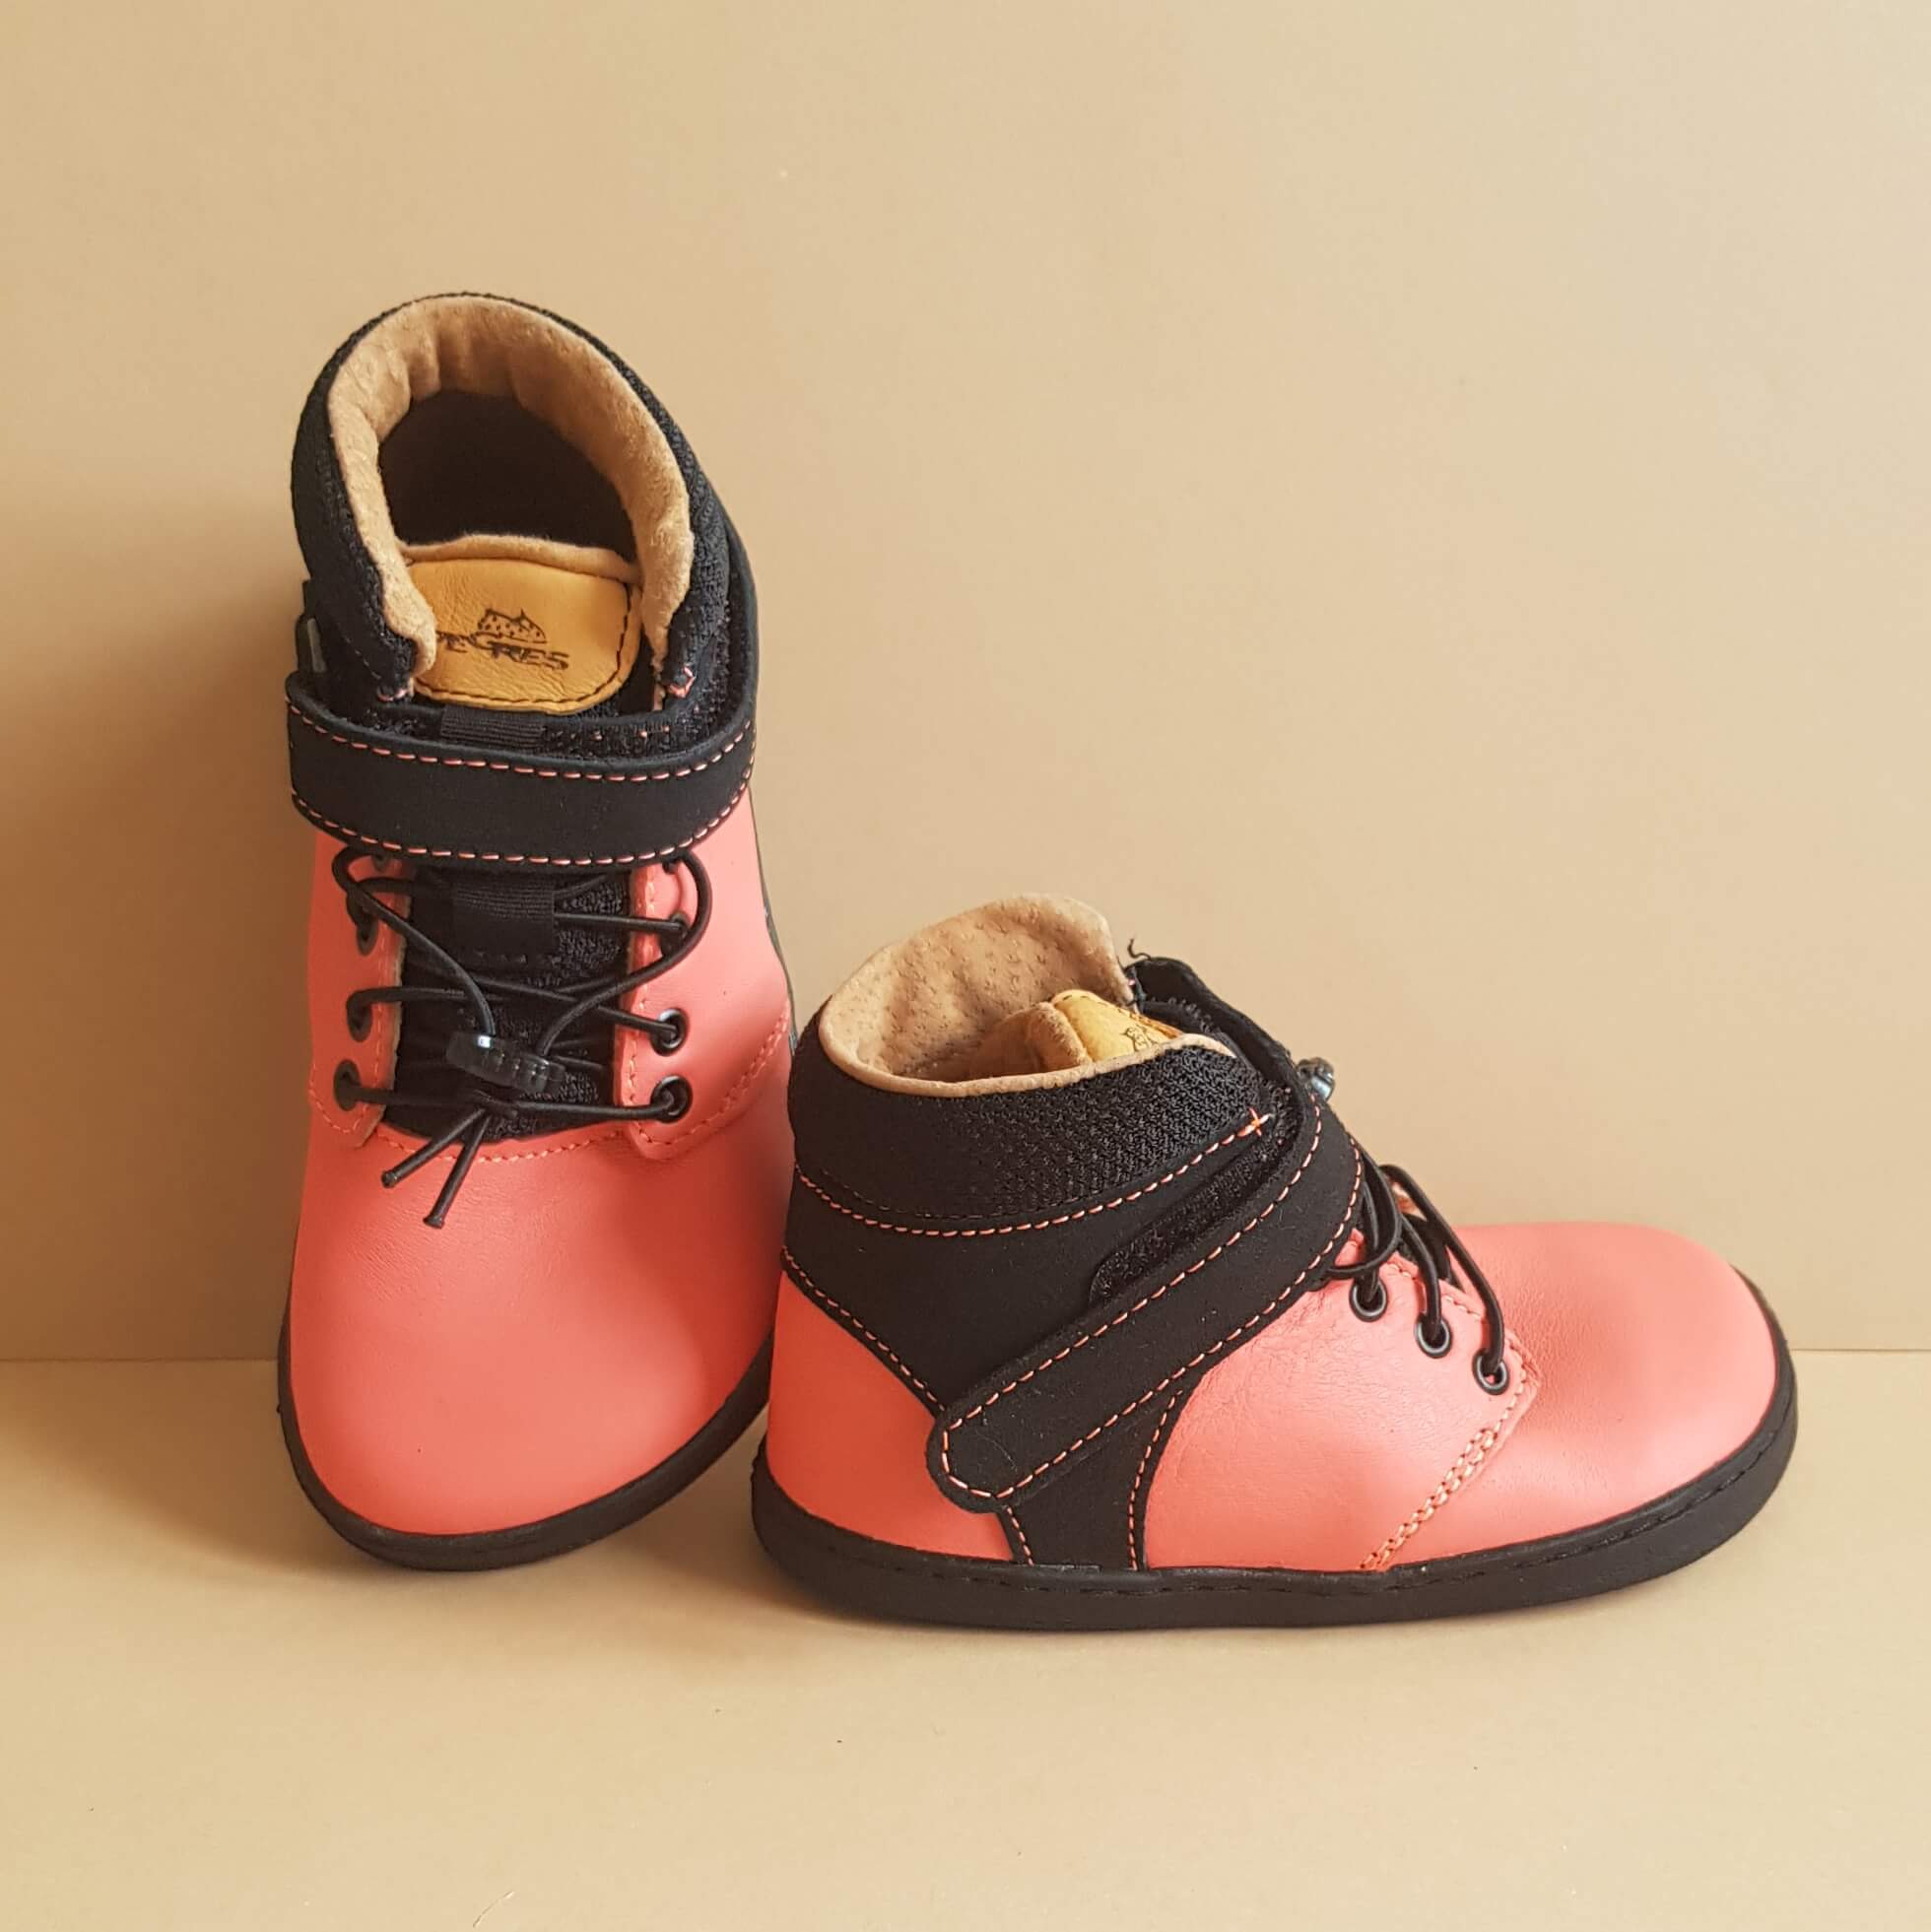 Barefoot High Ankle Boots - Salmon/Black